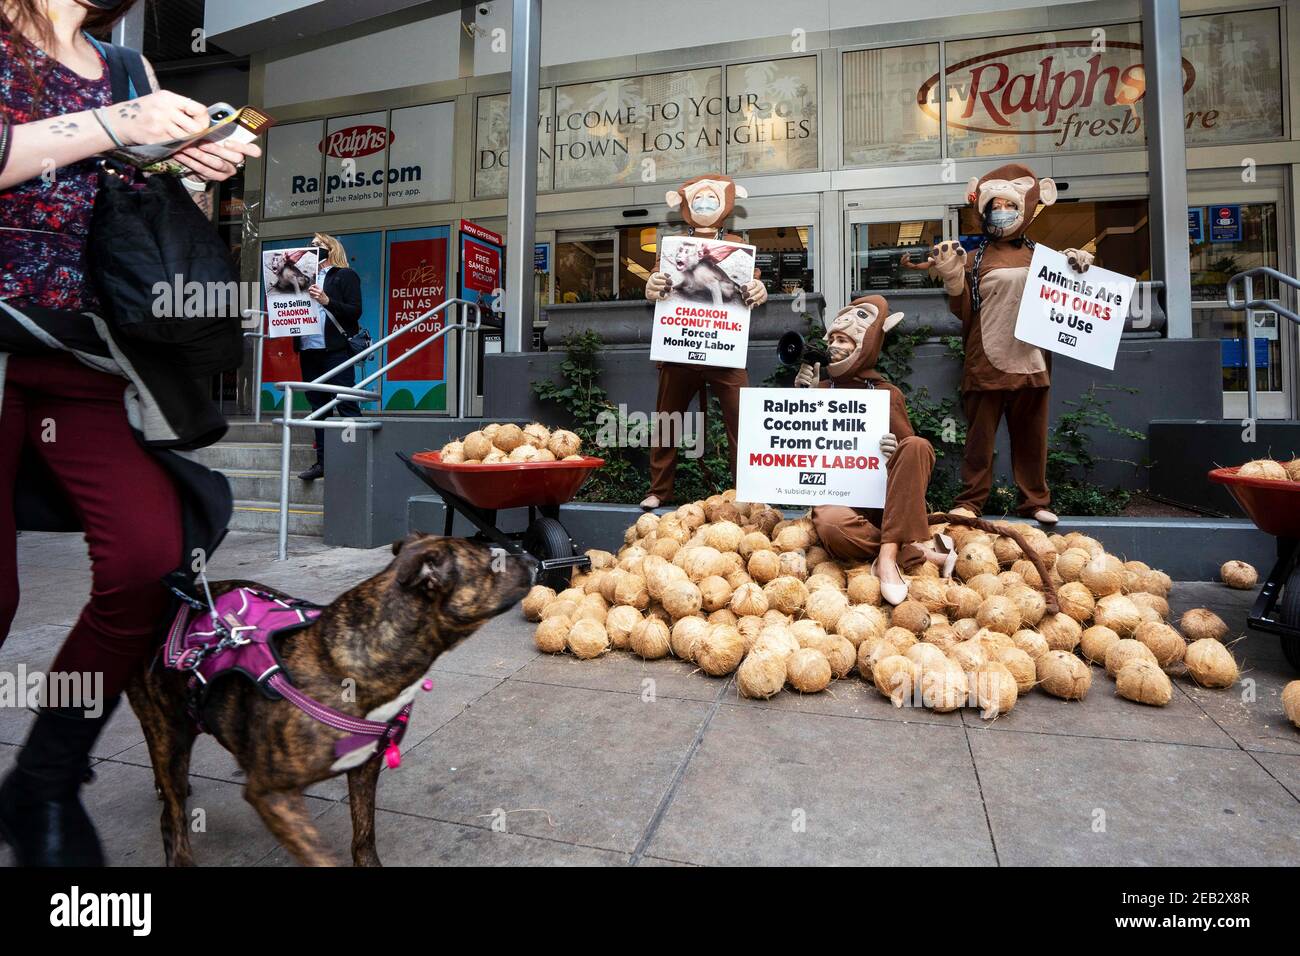 Los Angeles, California, USA. 16th Nov, 2020. PETA activists dressed in monkey costumes hold placards and coconuts during a protest against Thailand's Chaokoh brand for allegedly forcing monkeys to climb up trees to collect coconuts and keeping them in cruel conditions. Major U.S. retailers such as Costco and Target stopped selling Chaokoh coconut milk over allegations of forced monkey labor. Credit: Ronen Tivony/SOPA Images/ZUMA Wire/Alamy Live News Stock Photo